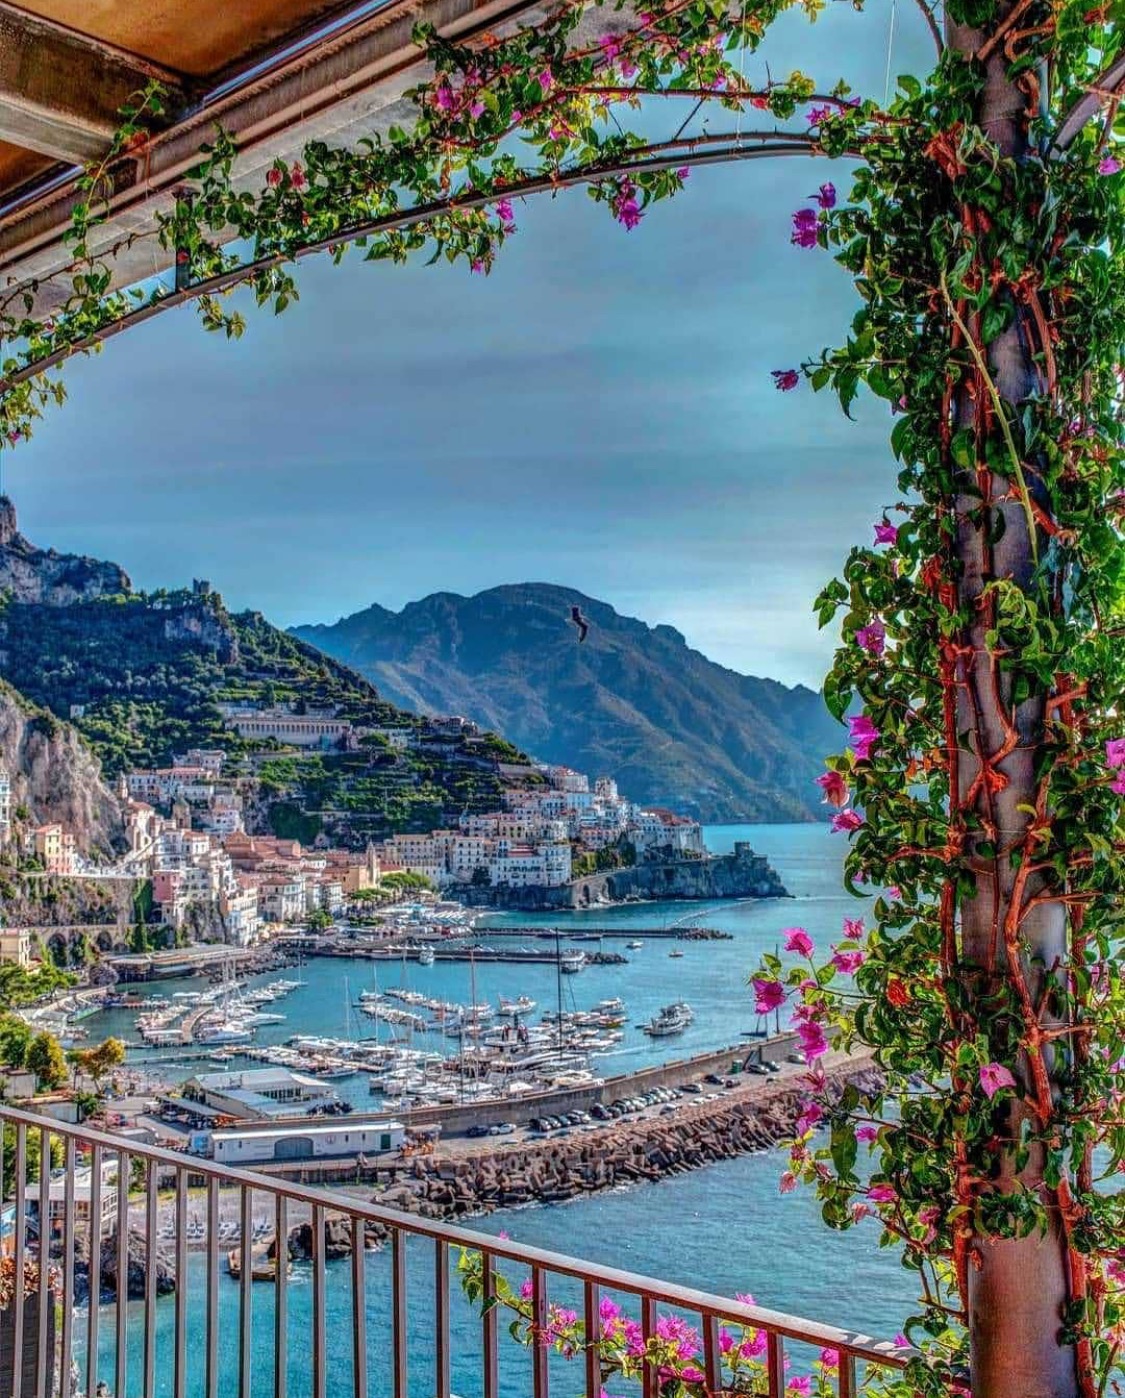 The 10 Most Beautiful Italian Coastal Towns and Cities